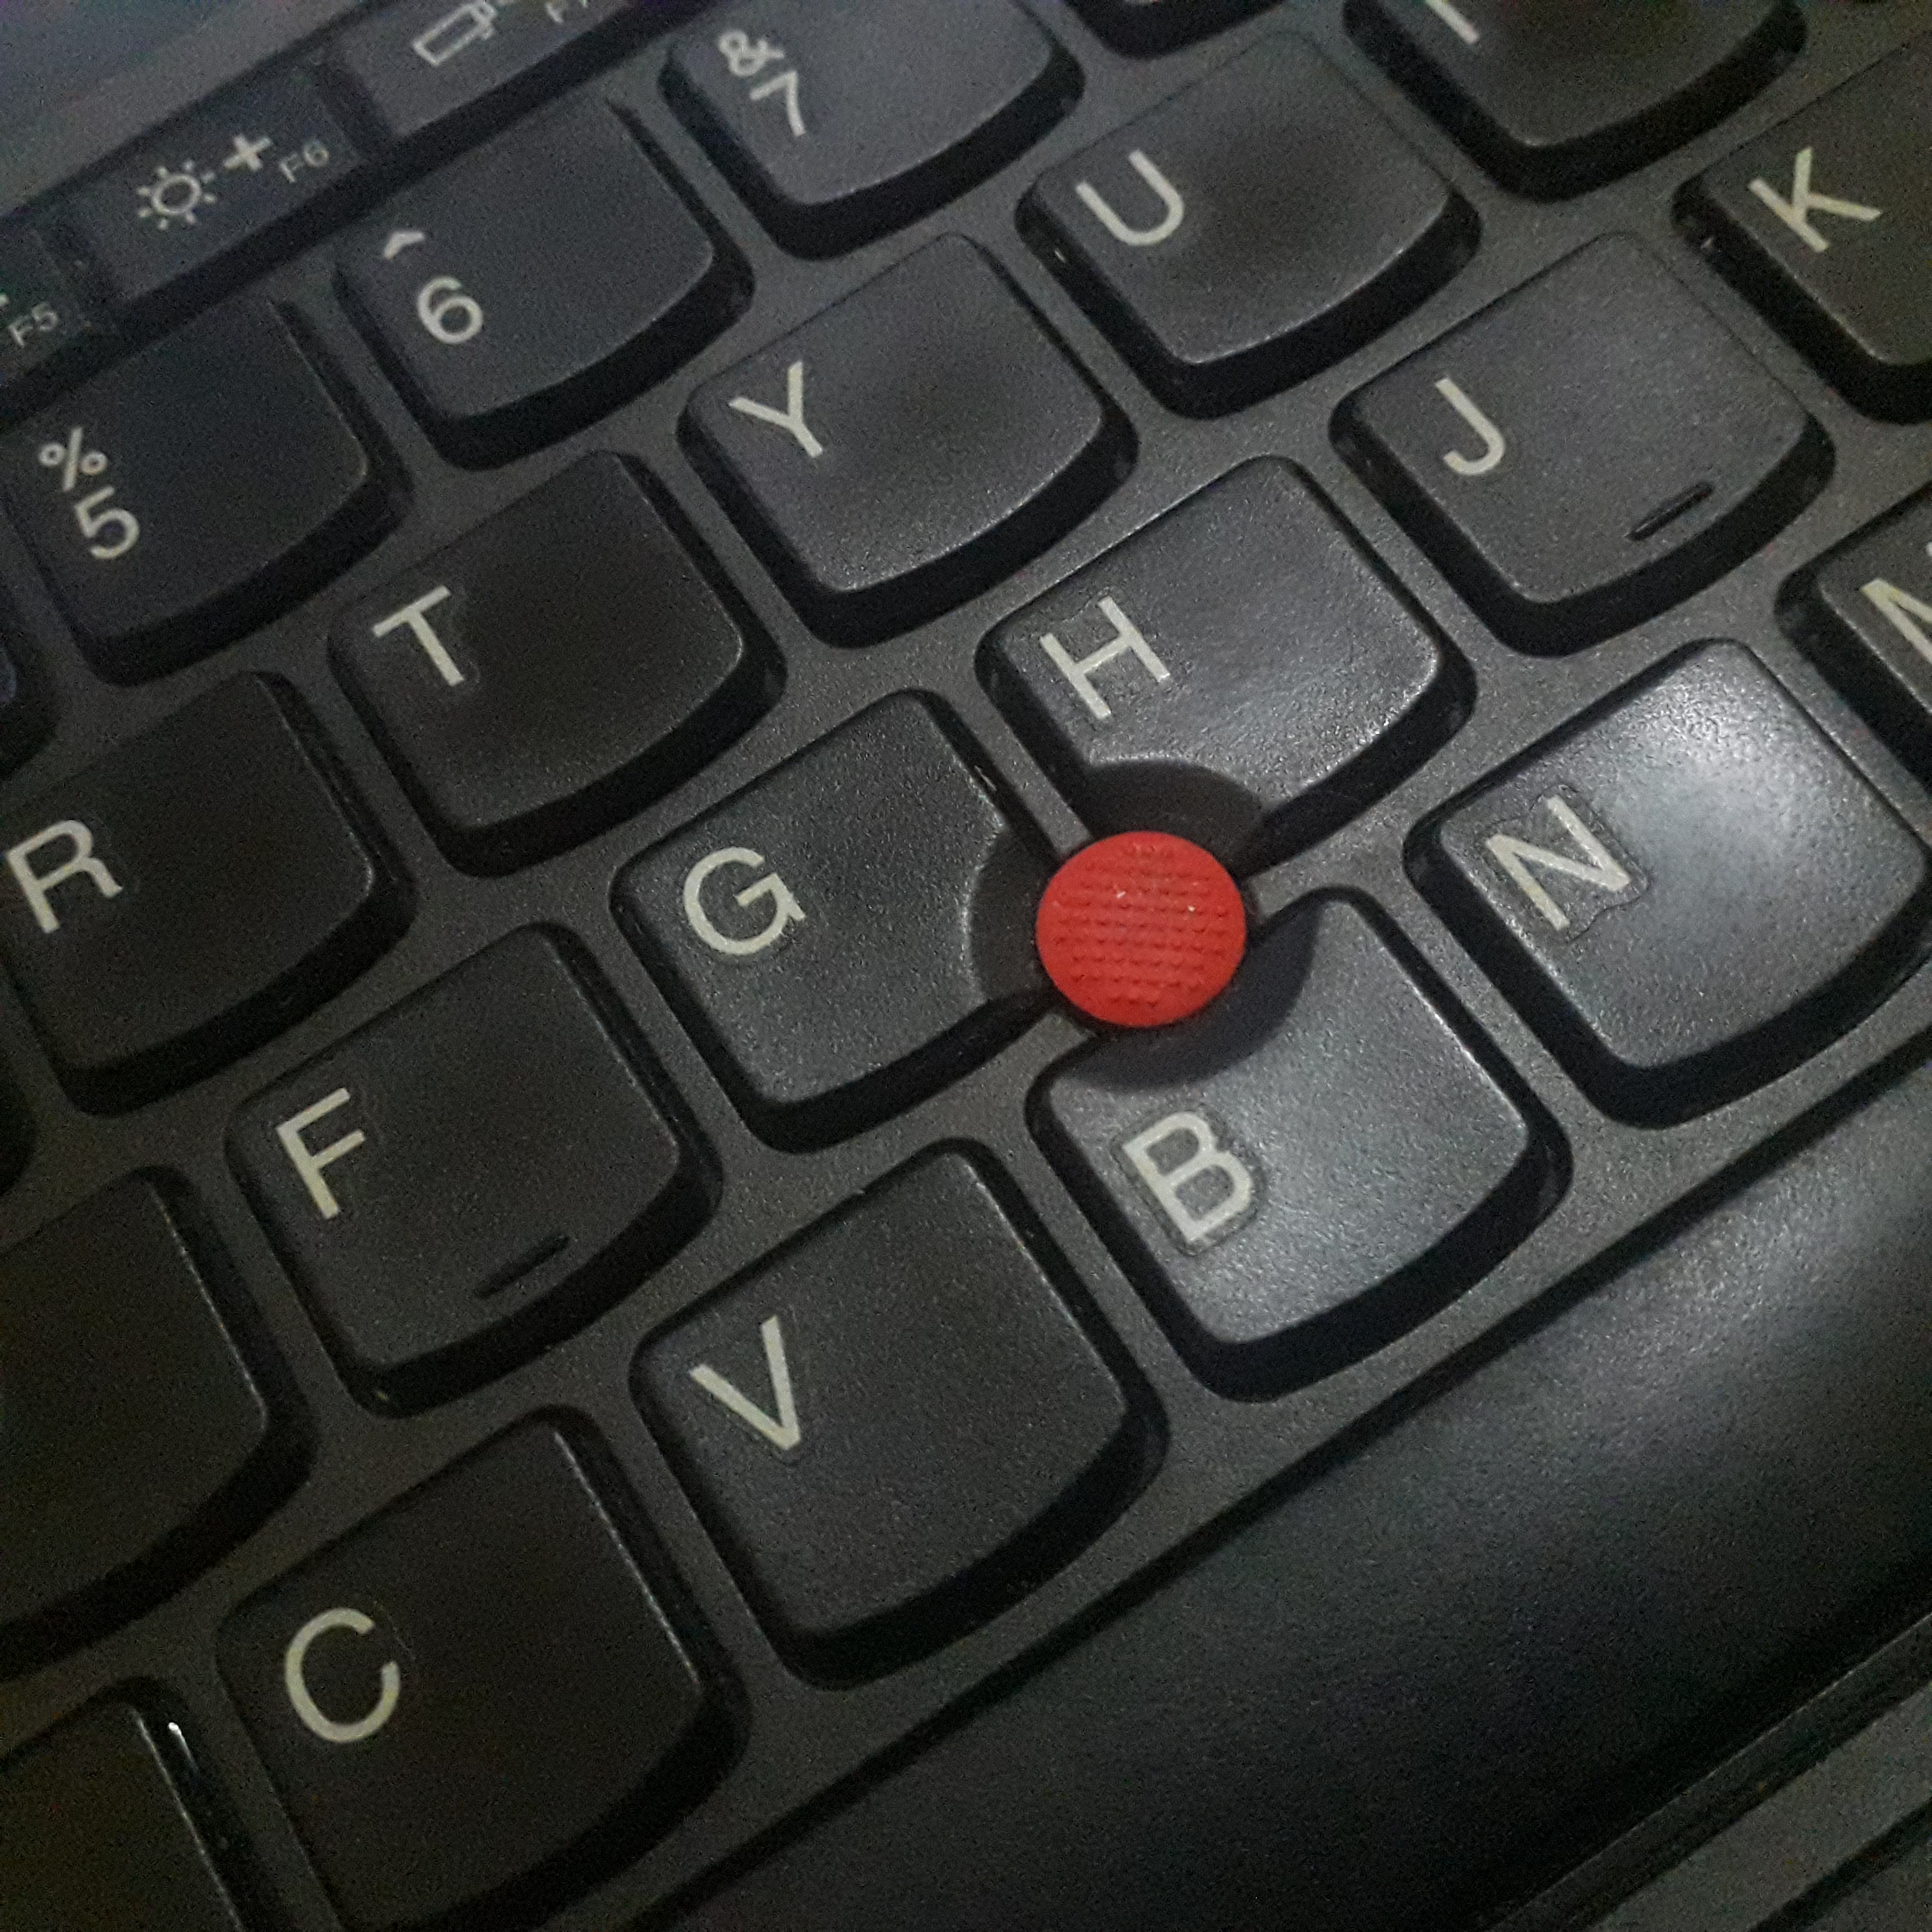 TrackPoint